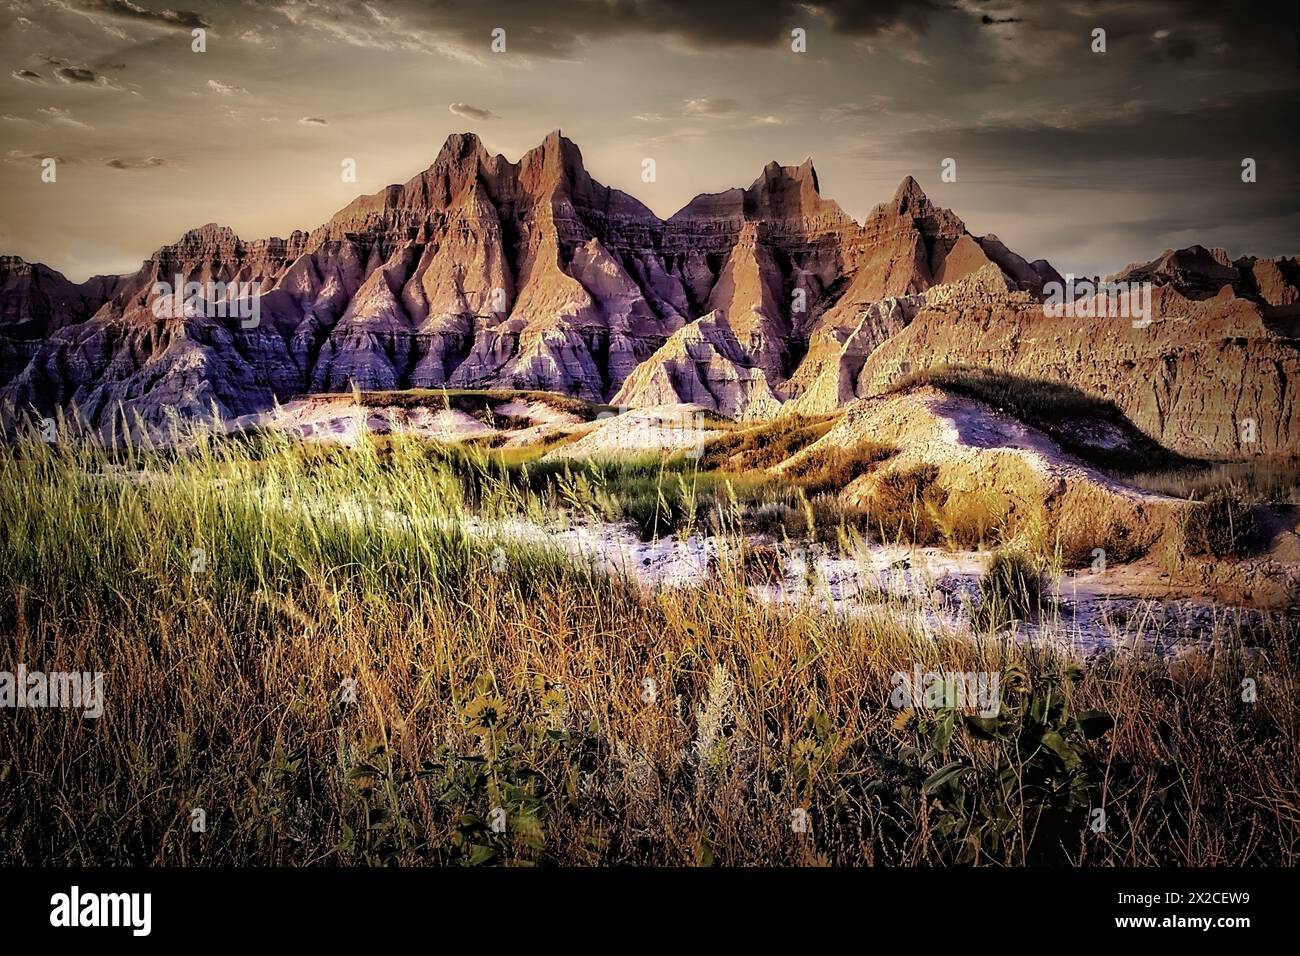 Eroded mountains in the Badlands National Park in South Dakota. Stock Photo